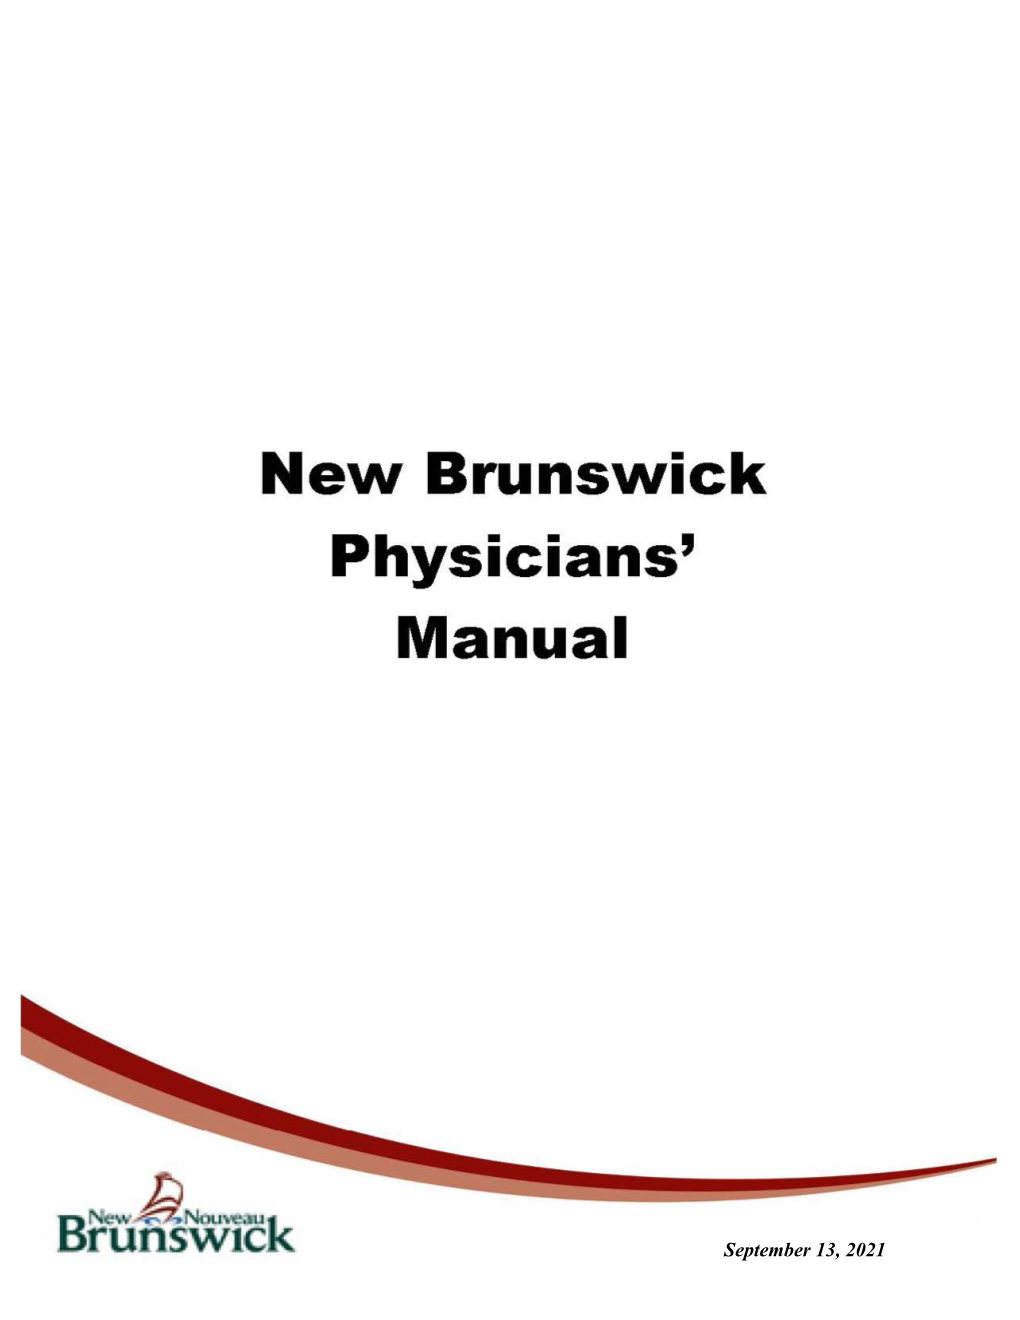 Physician's Manual